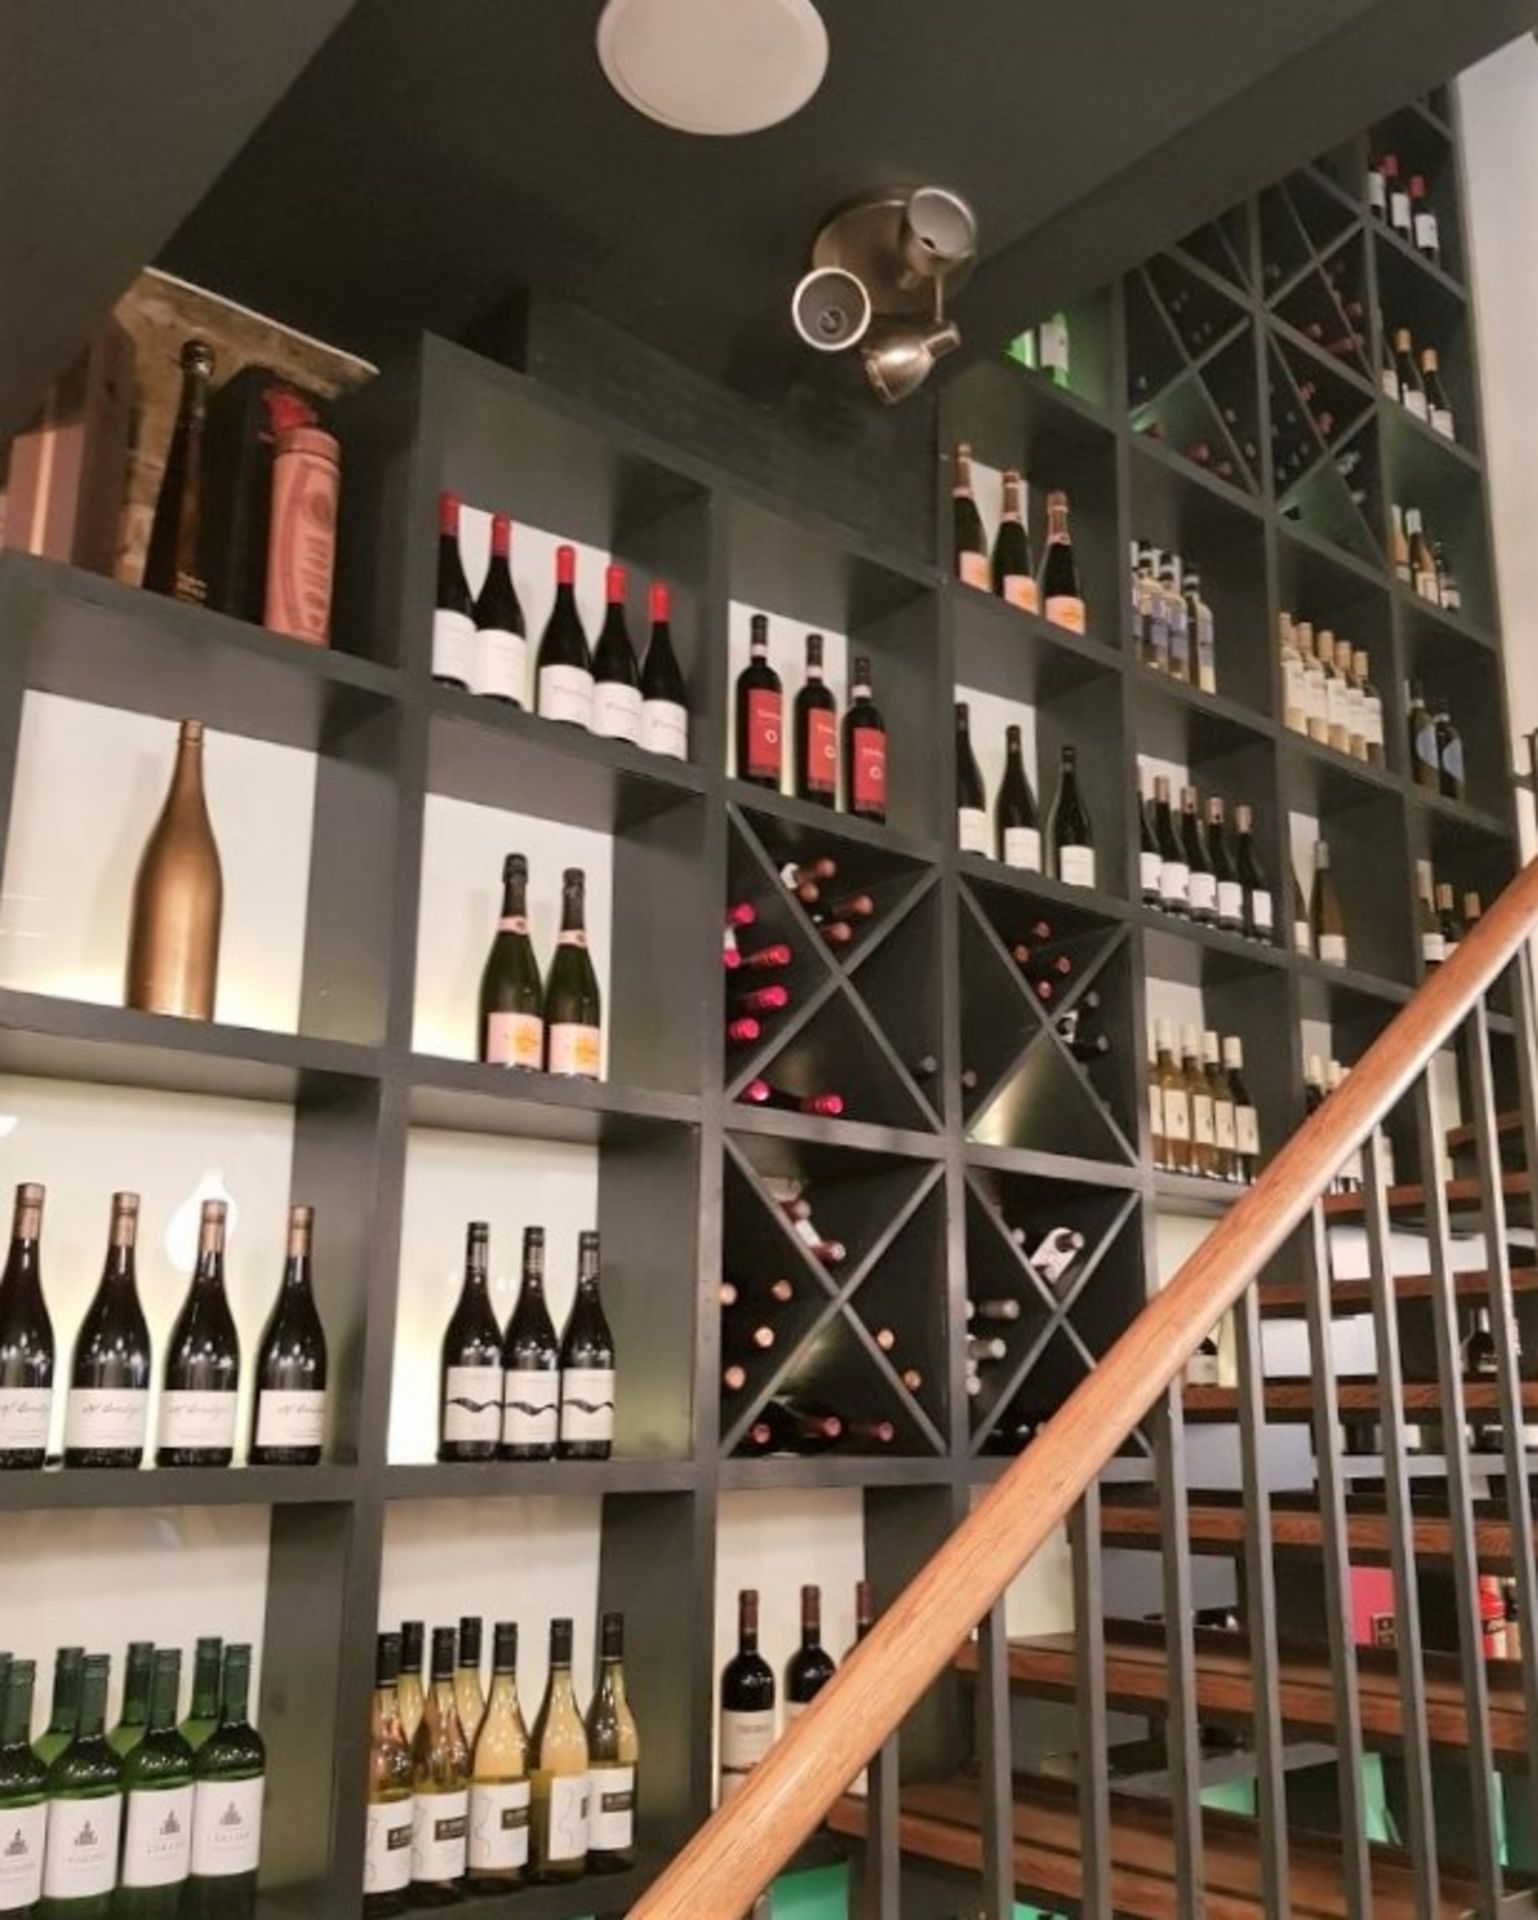 1 x Large Bespoke Shelving System For Displaying Books, Wine Bottles or Collectibles - More Pictures - Bild 2 aus 13